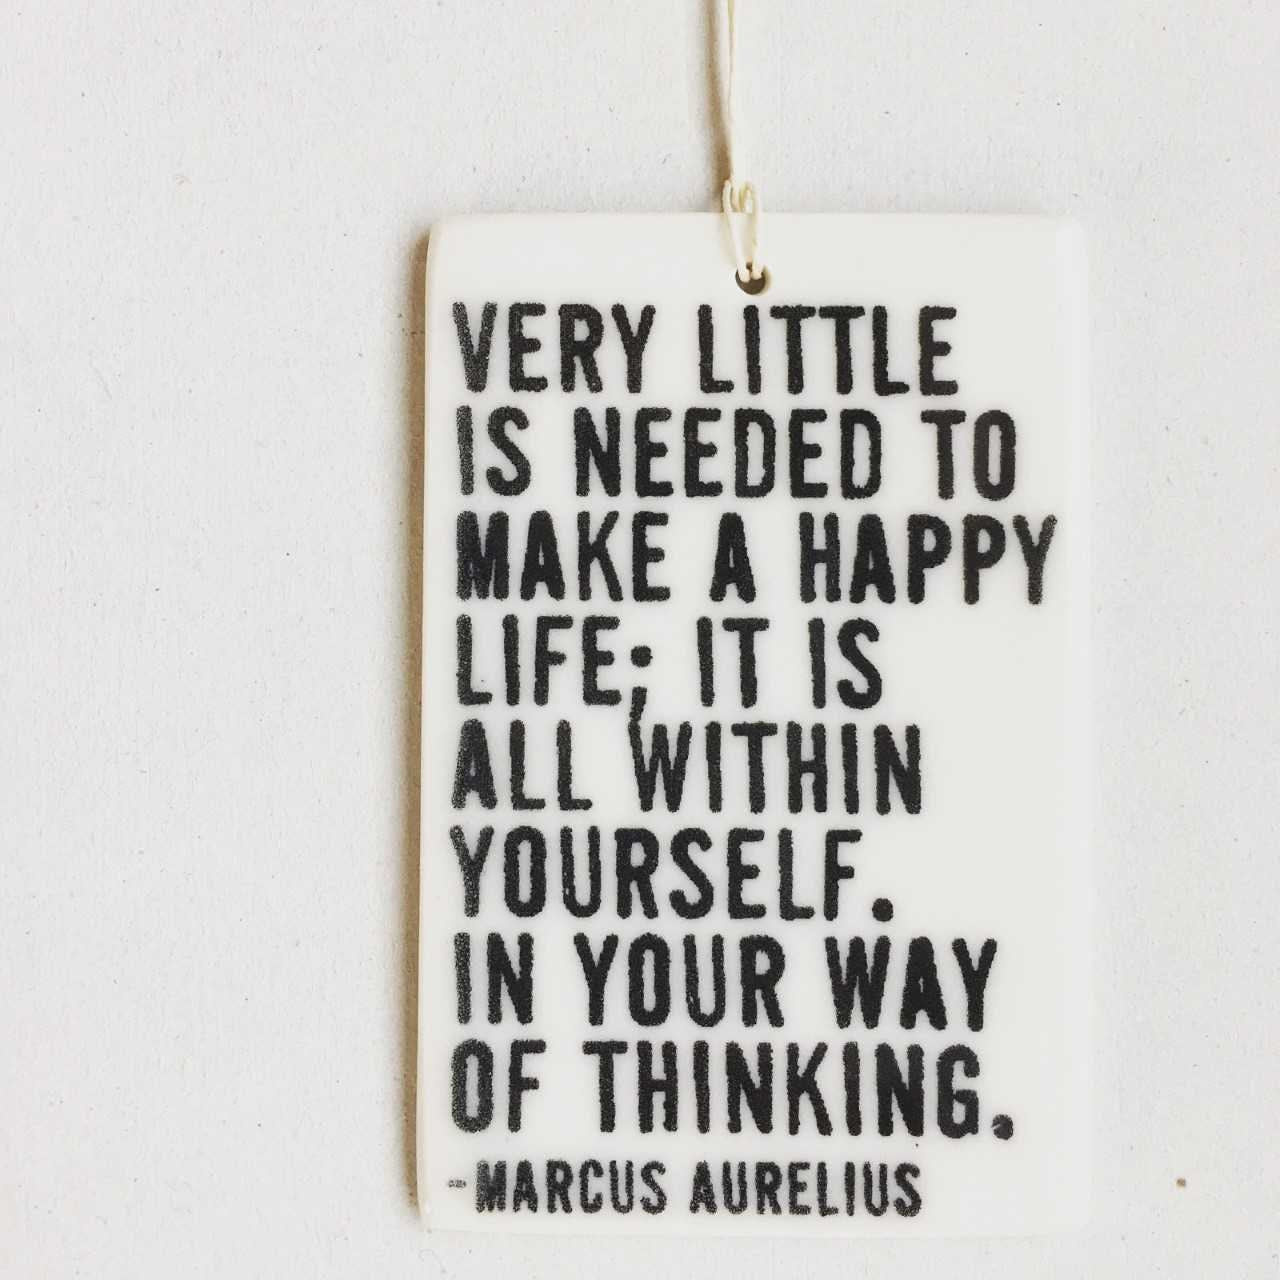 marcus aurelius quote | stoicism | ceramic wall tag | ceramic wall tile | screenprinted ceramics | mindfulness | daily reminder | wise words